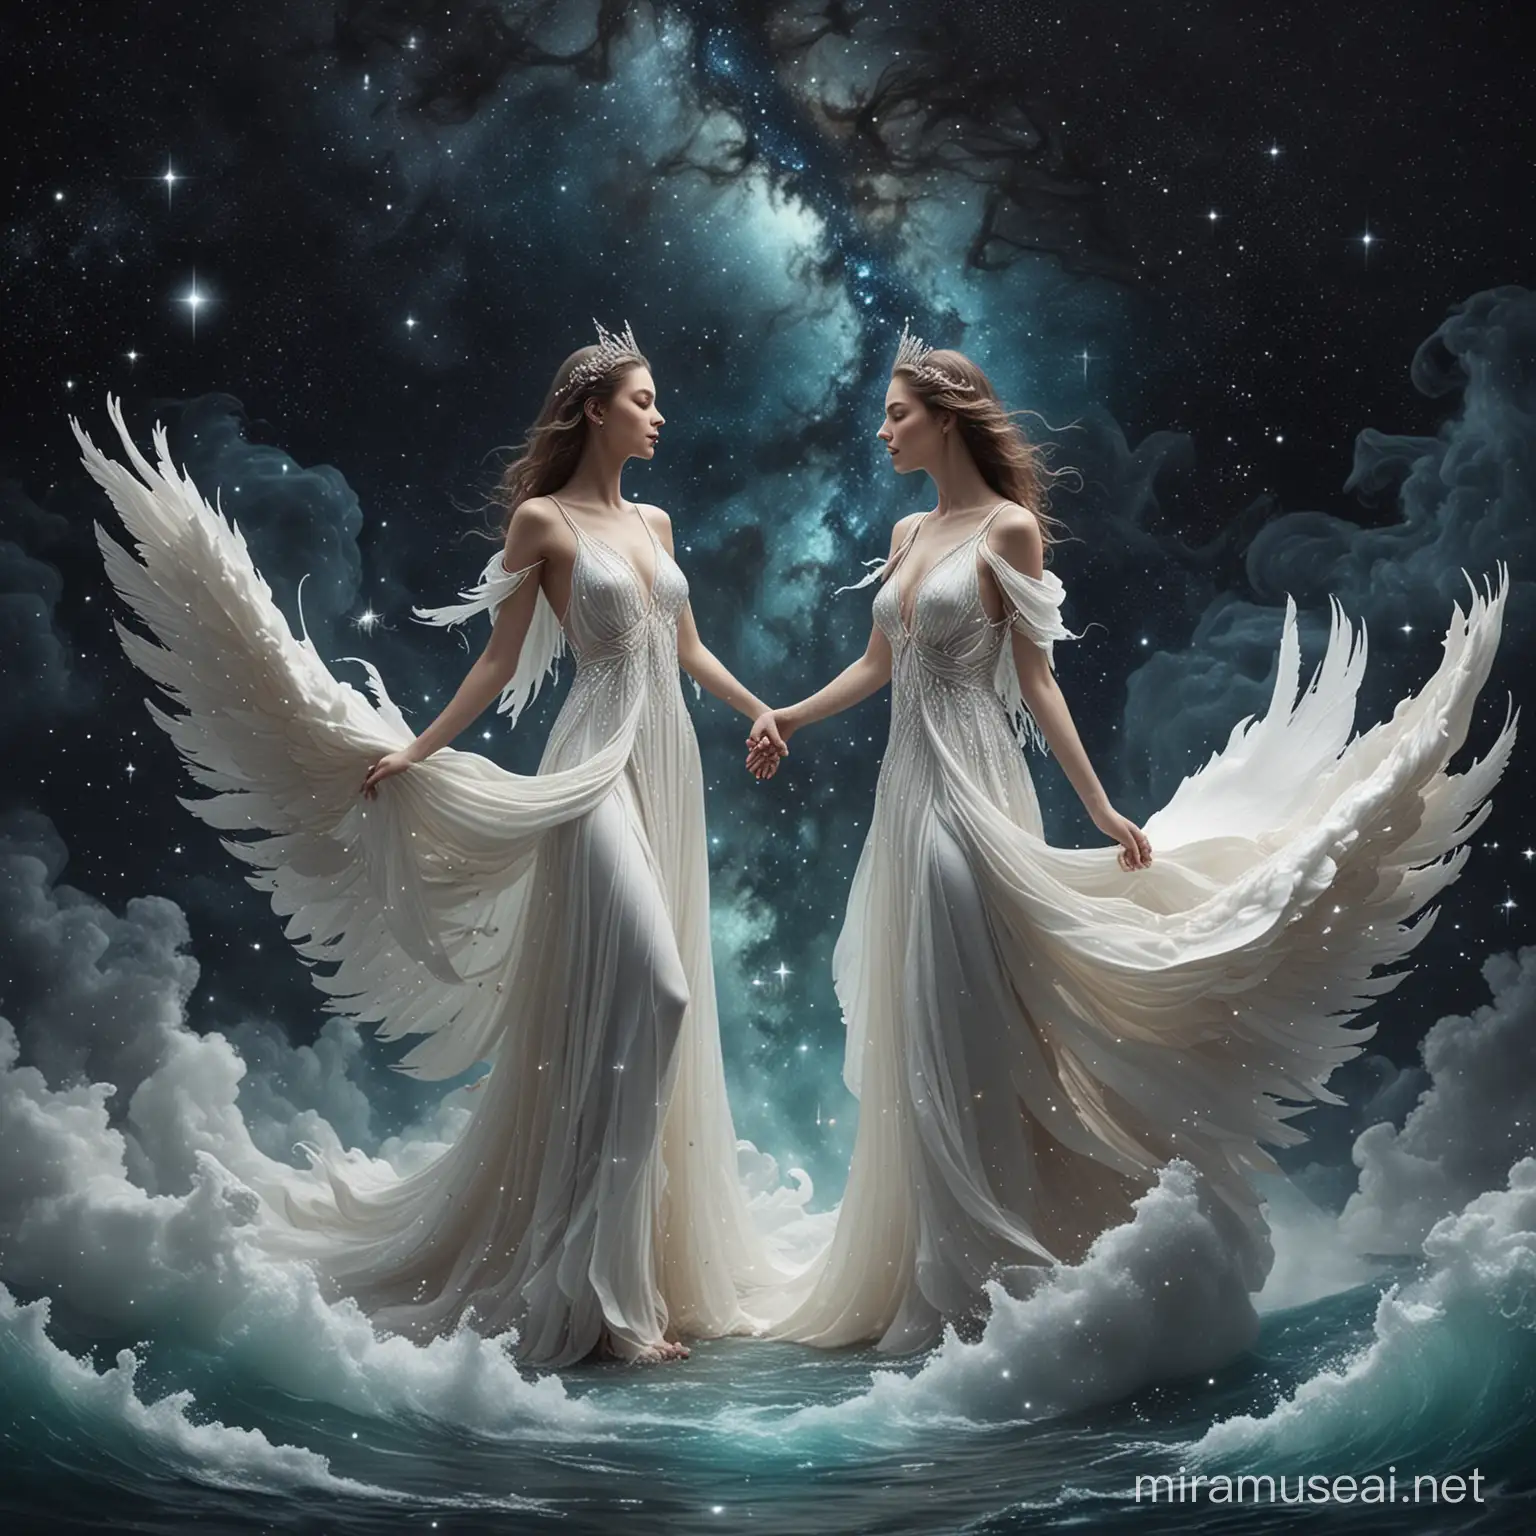 Fashion Portfolio Front Page The Magnificent Swans of an Enchanted Galaxy Realm